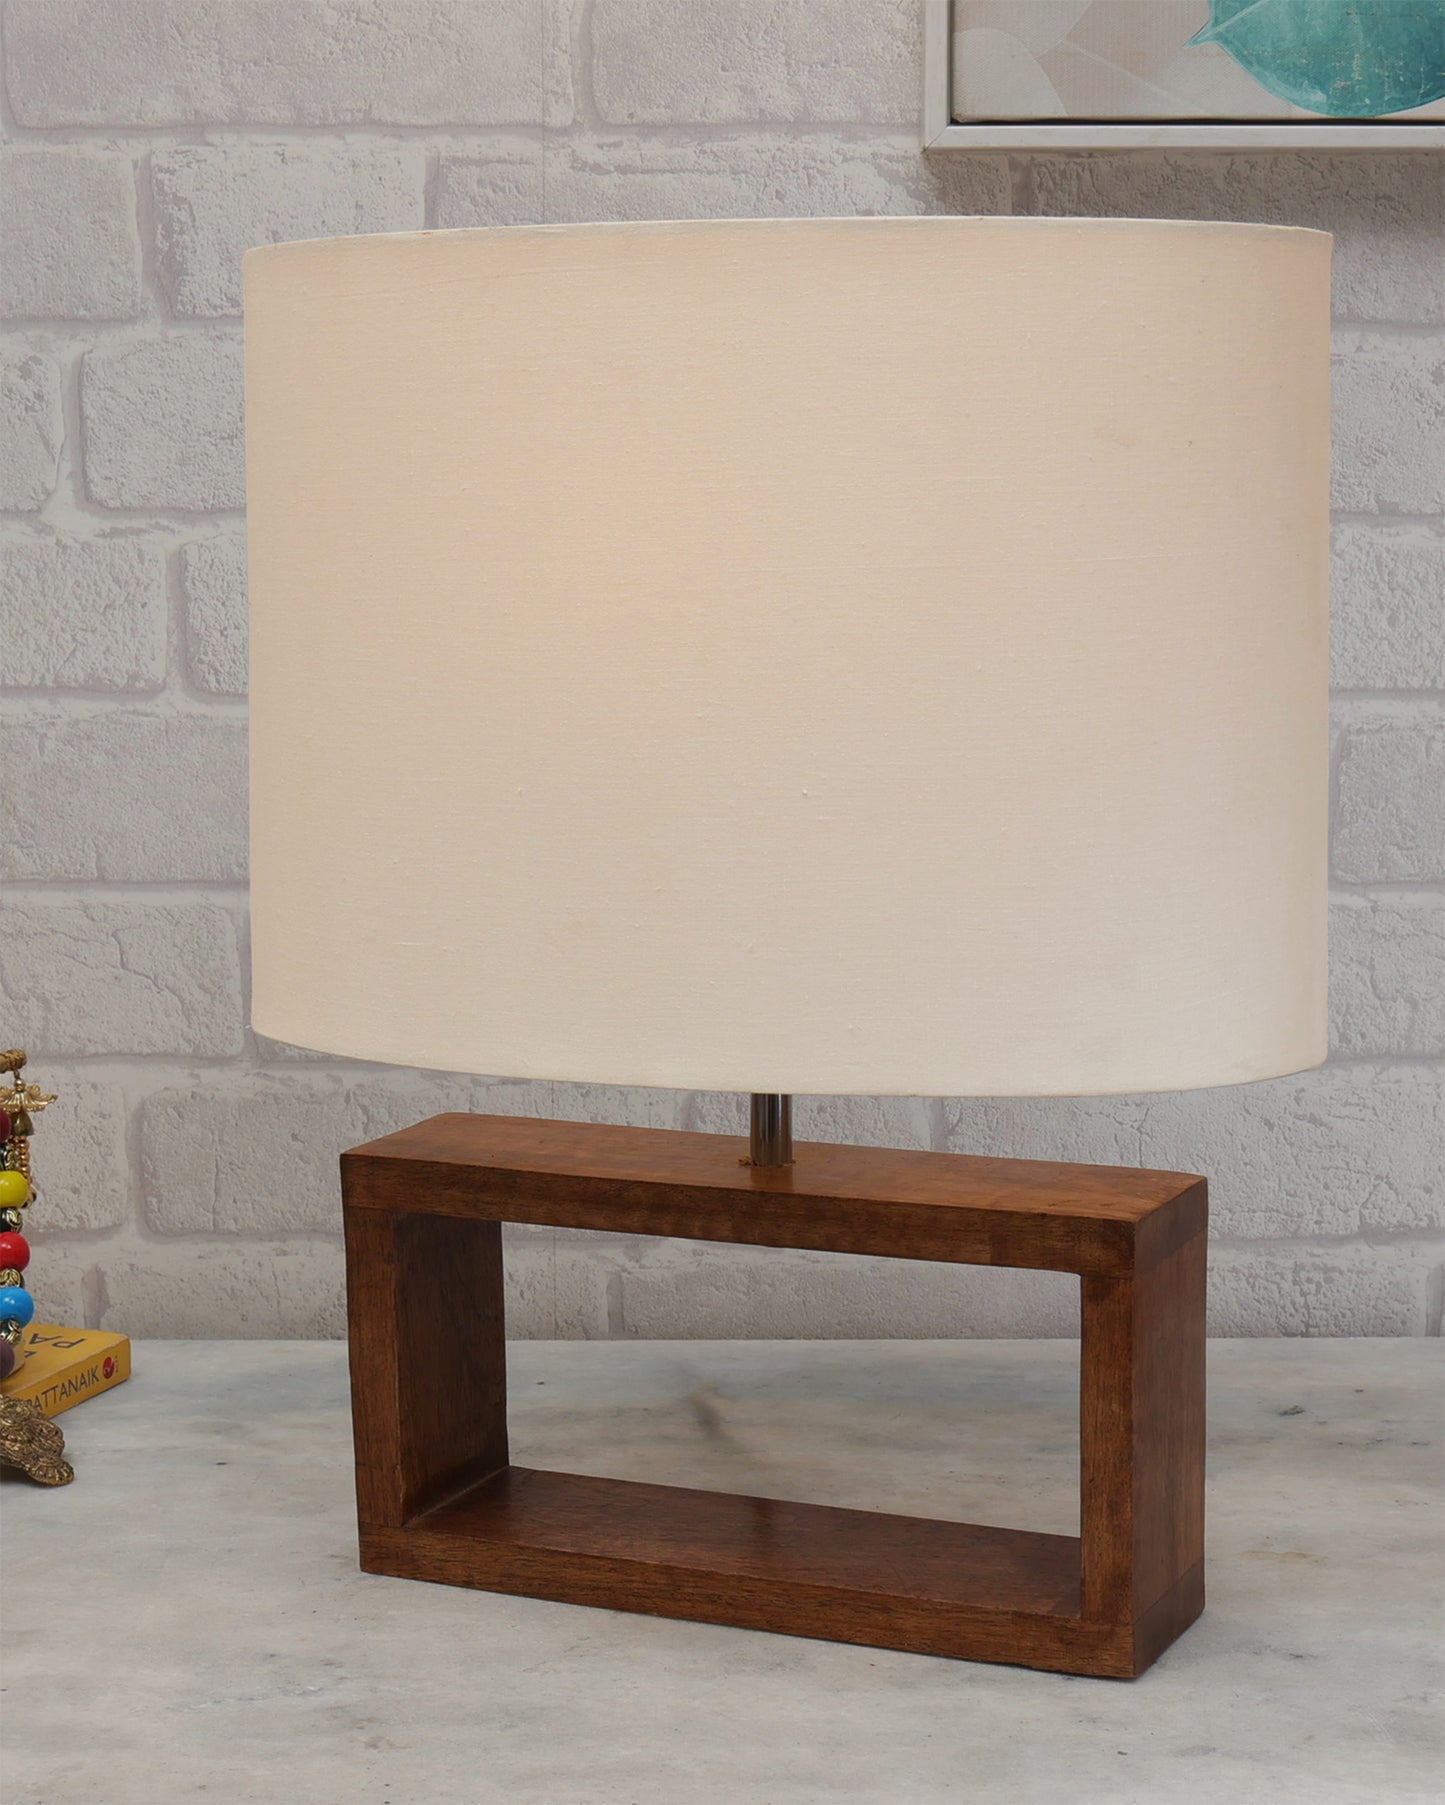 Wood Table Lamp French Country Rustic Bedside Desk Nightstand Lamp for Bedroom Living Room Office LED Bulb Included, Walnut Rectangle.